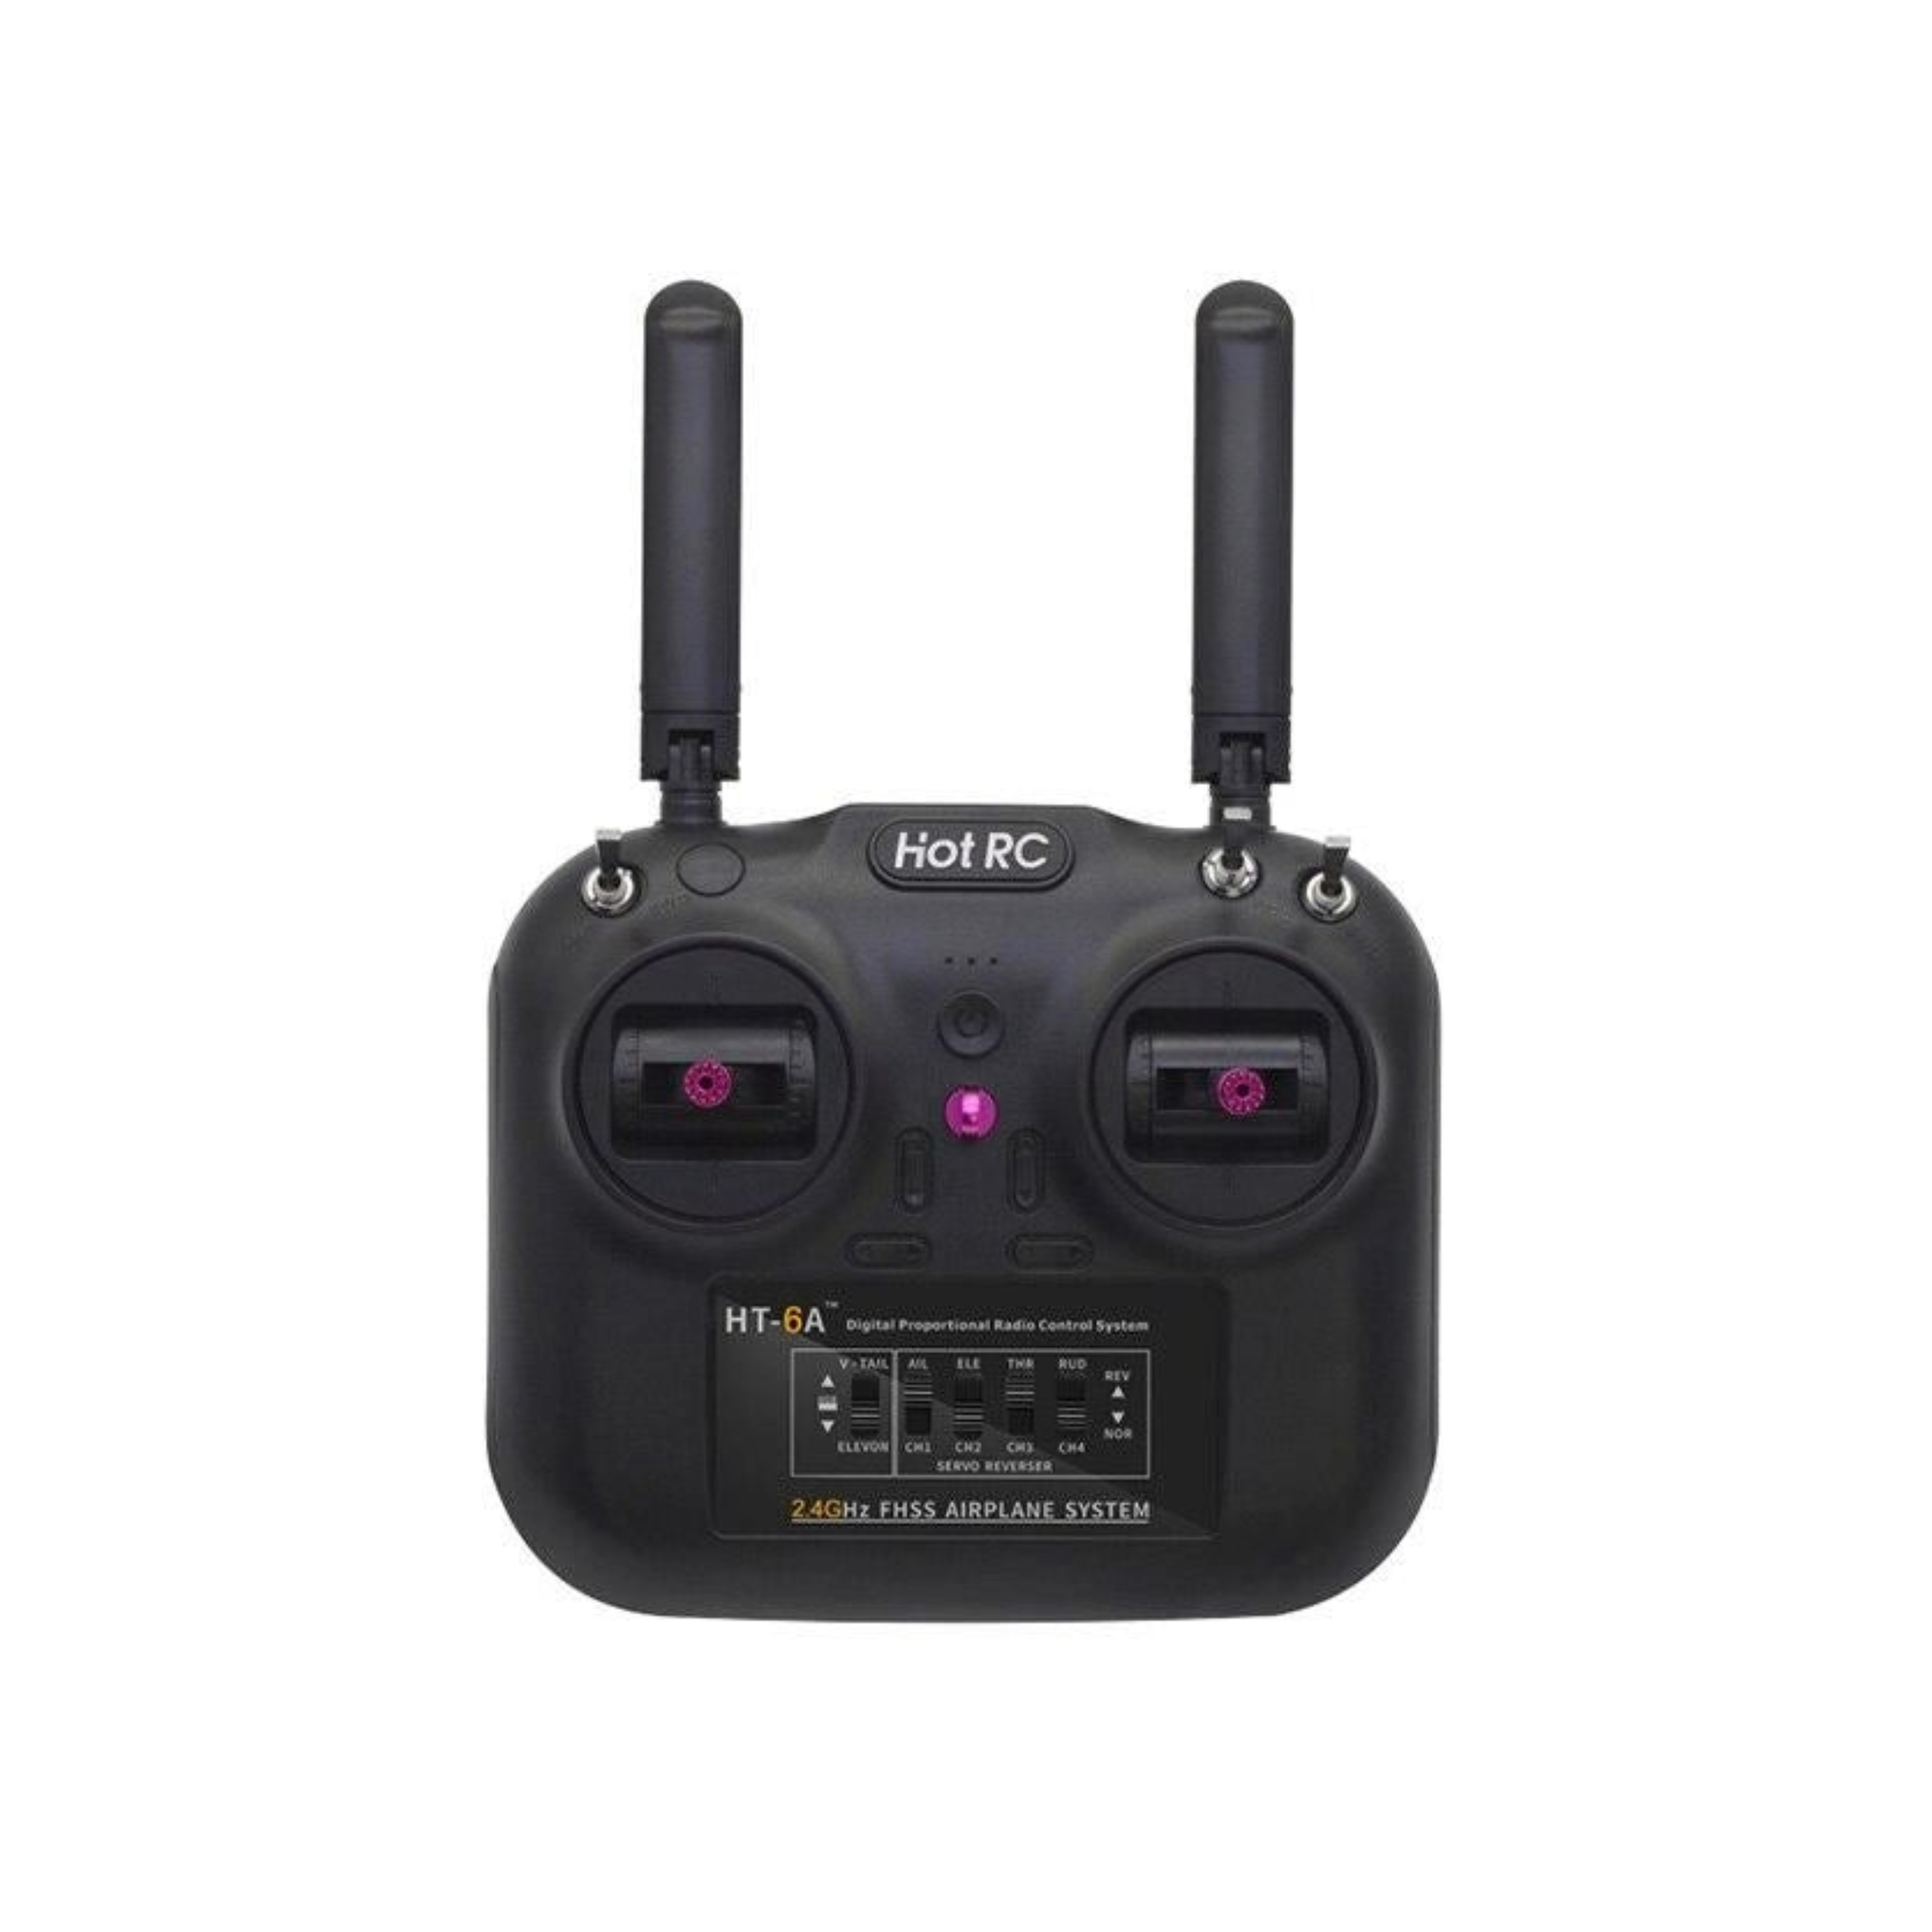 HT-6A UAV Aircraft Model six-channel Remote Controller Suitable for Small Cross